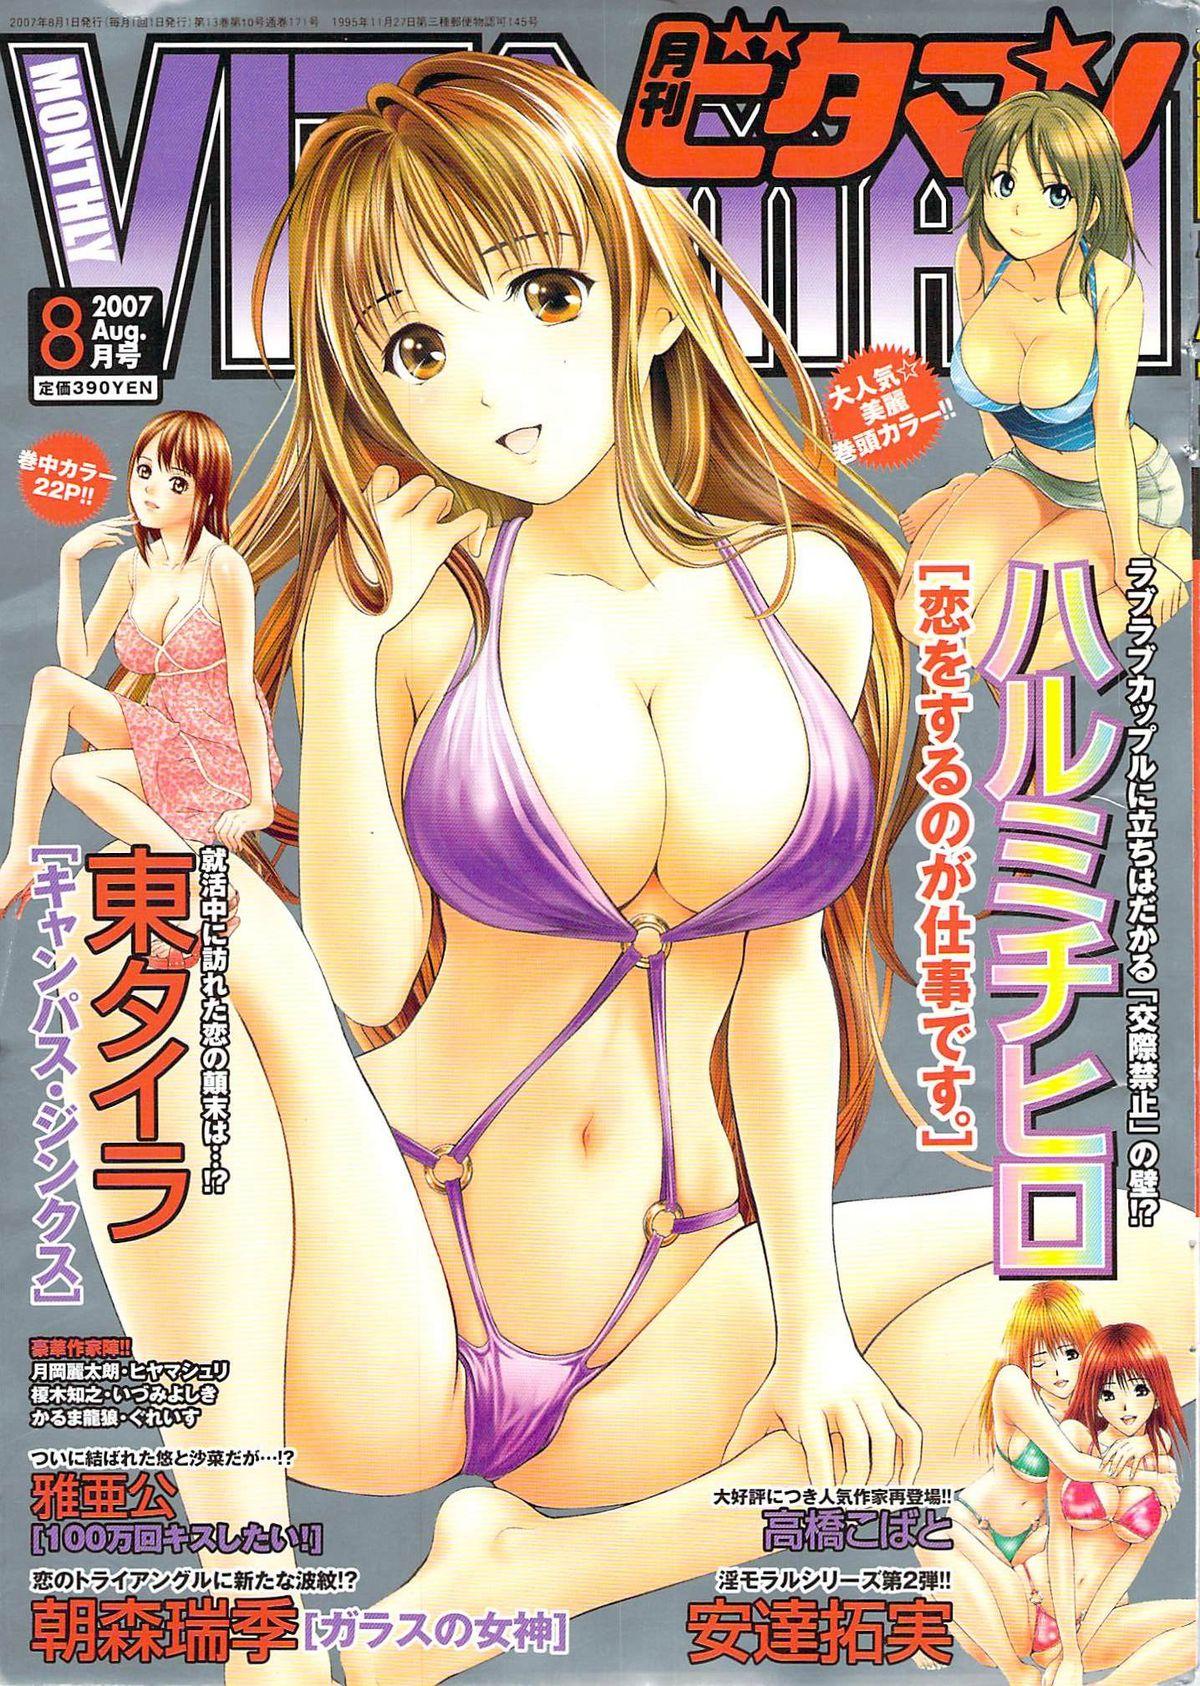 Free 18 Year Old Porn Monthly Vitaman 2007-08 - Gintama All - Page 1